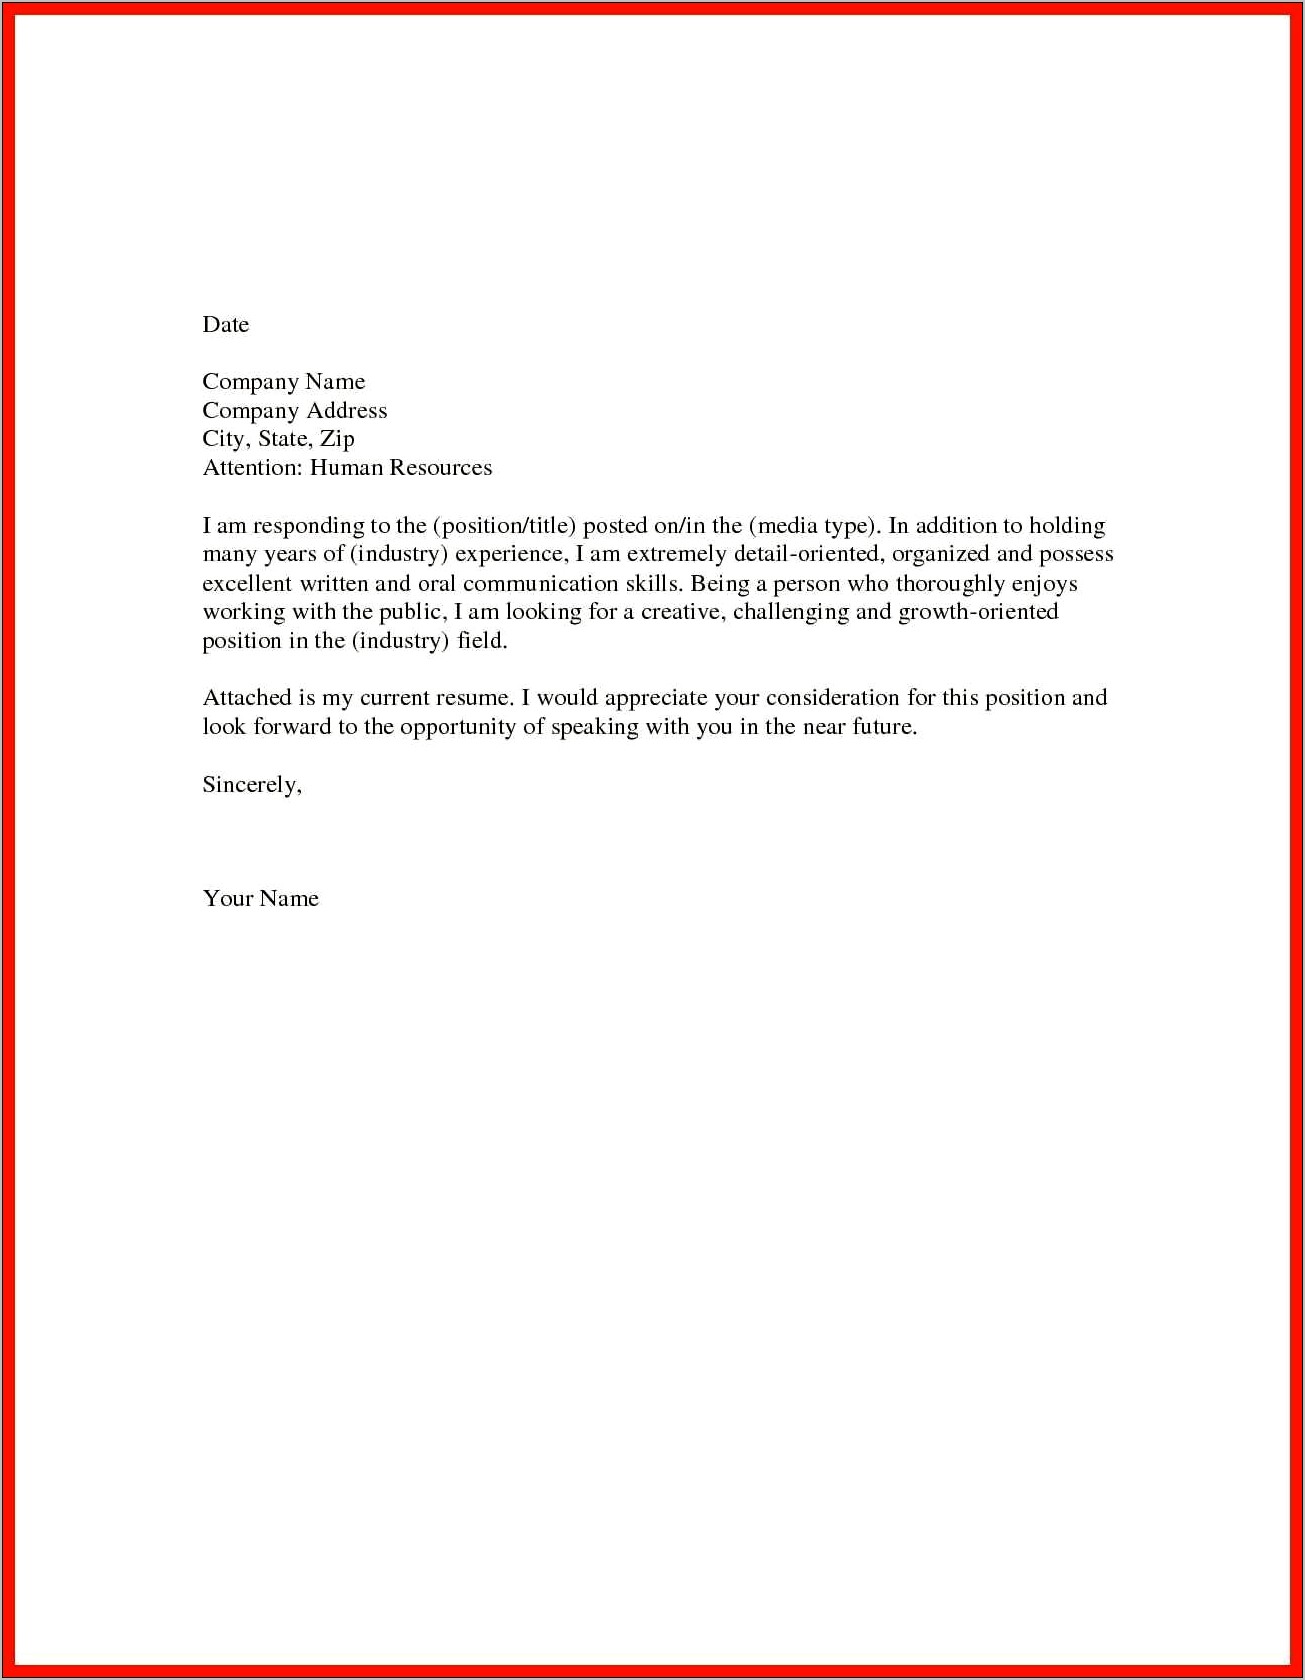 Brief Cover Letter Examples For Resume